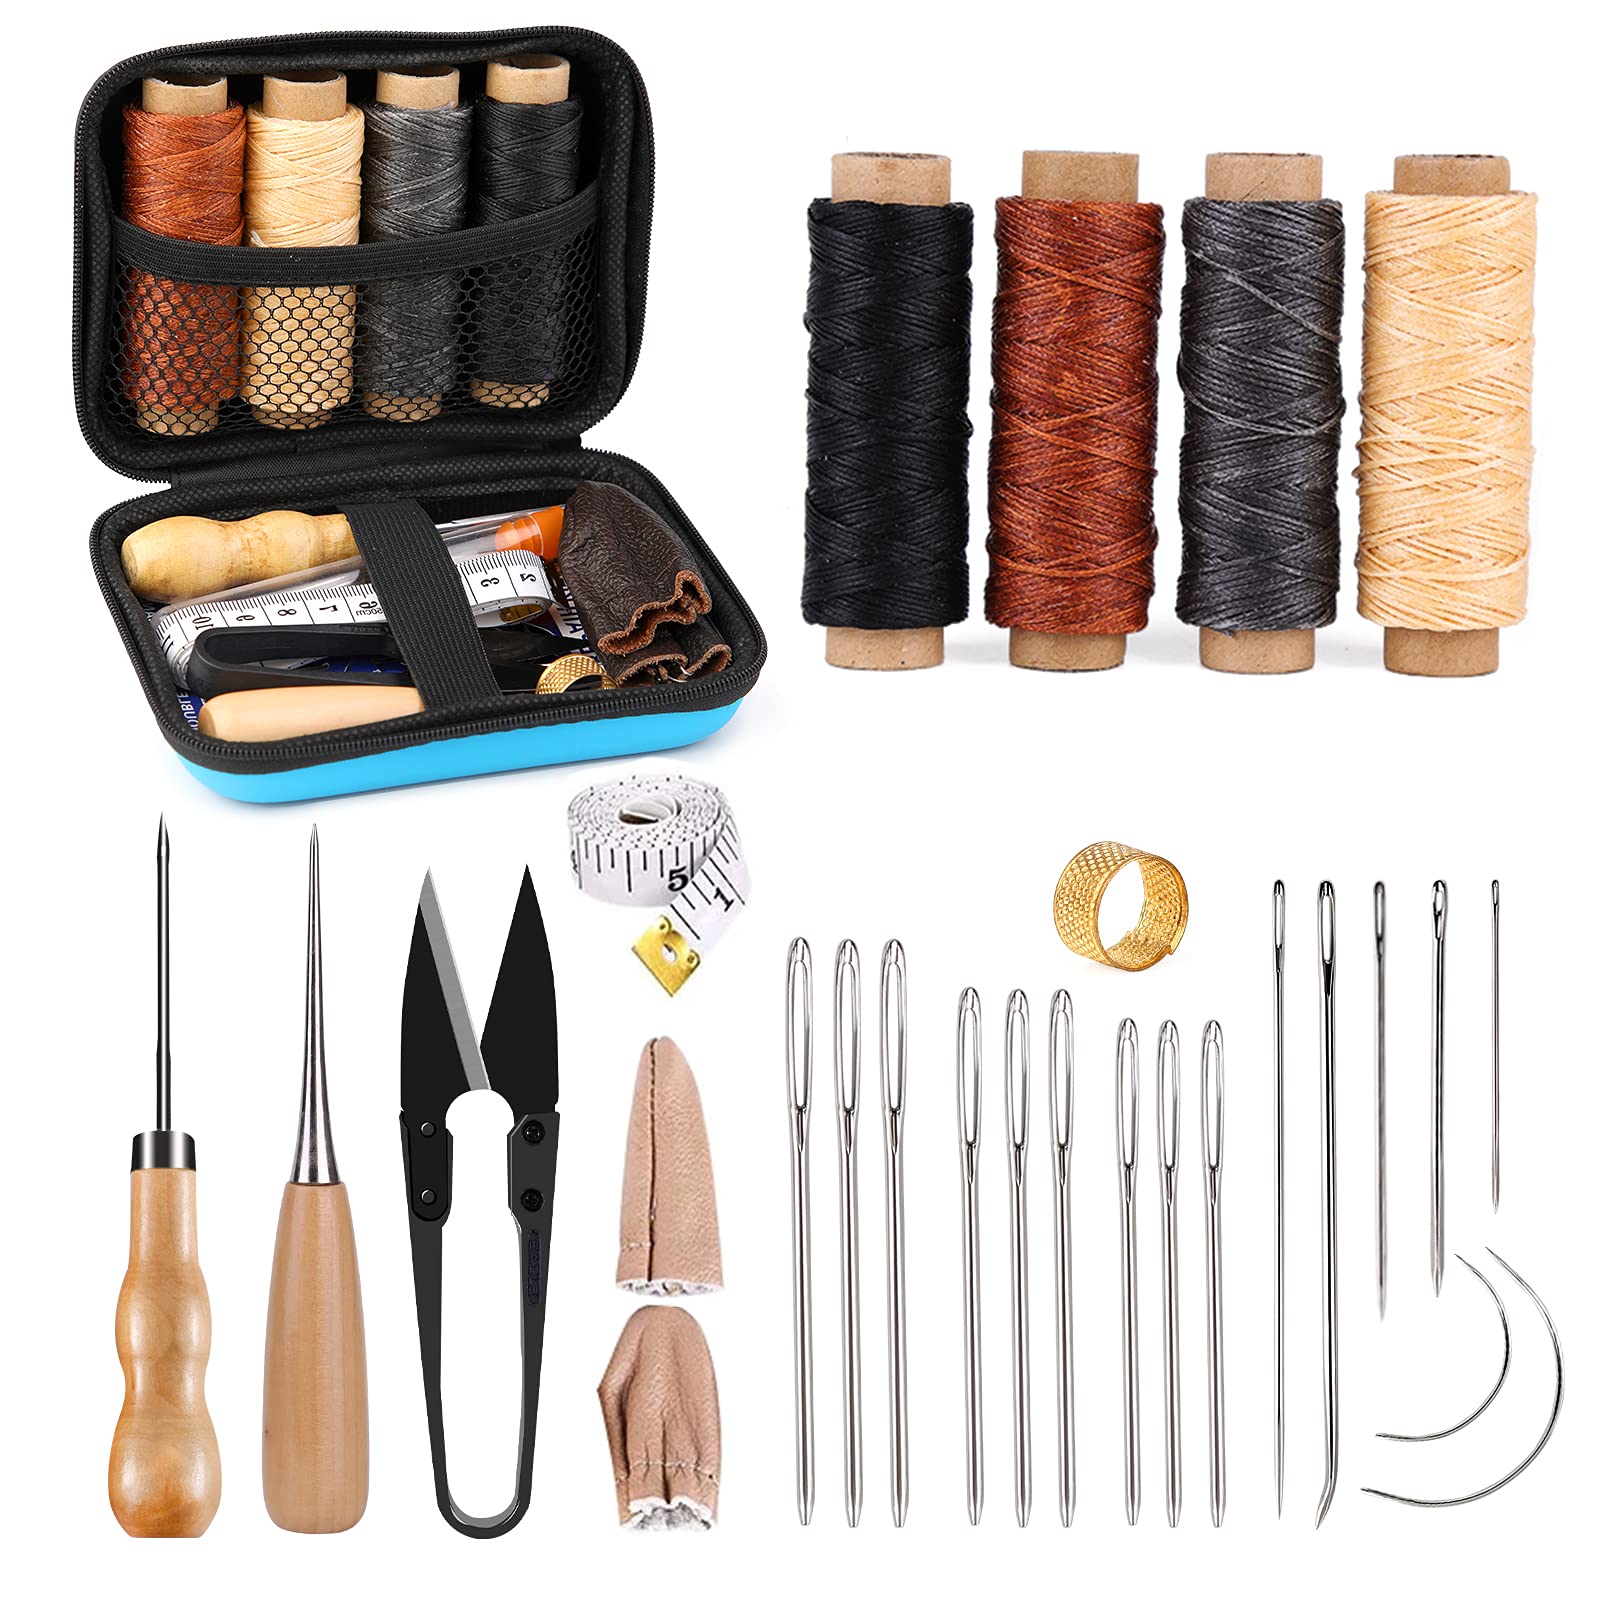 Sewing Kit,DIY Needle and Thread Kit with Sewing Supplies and